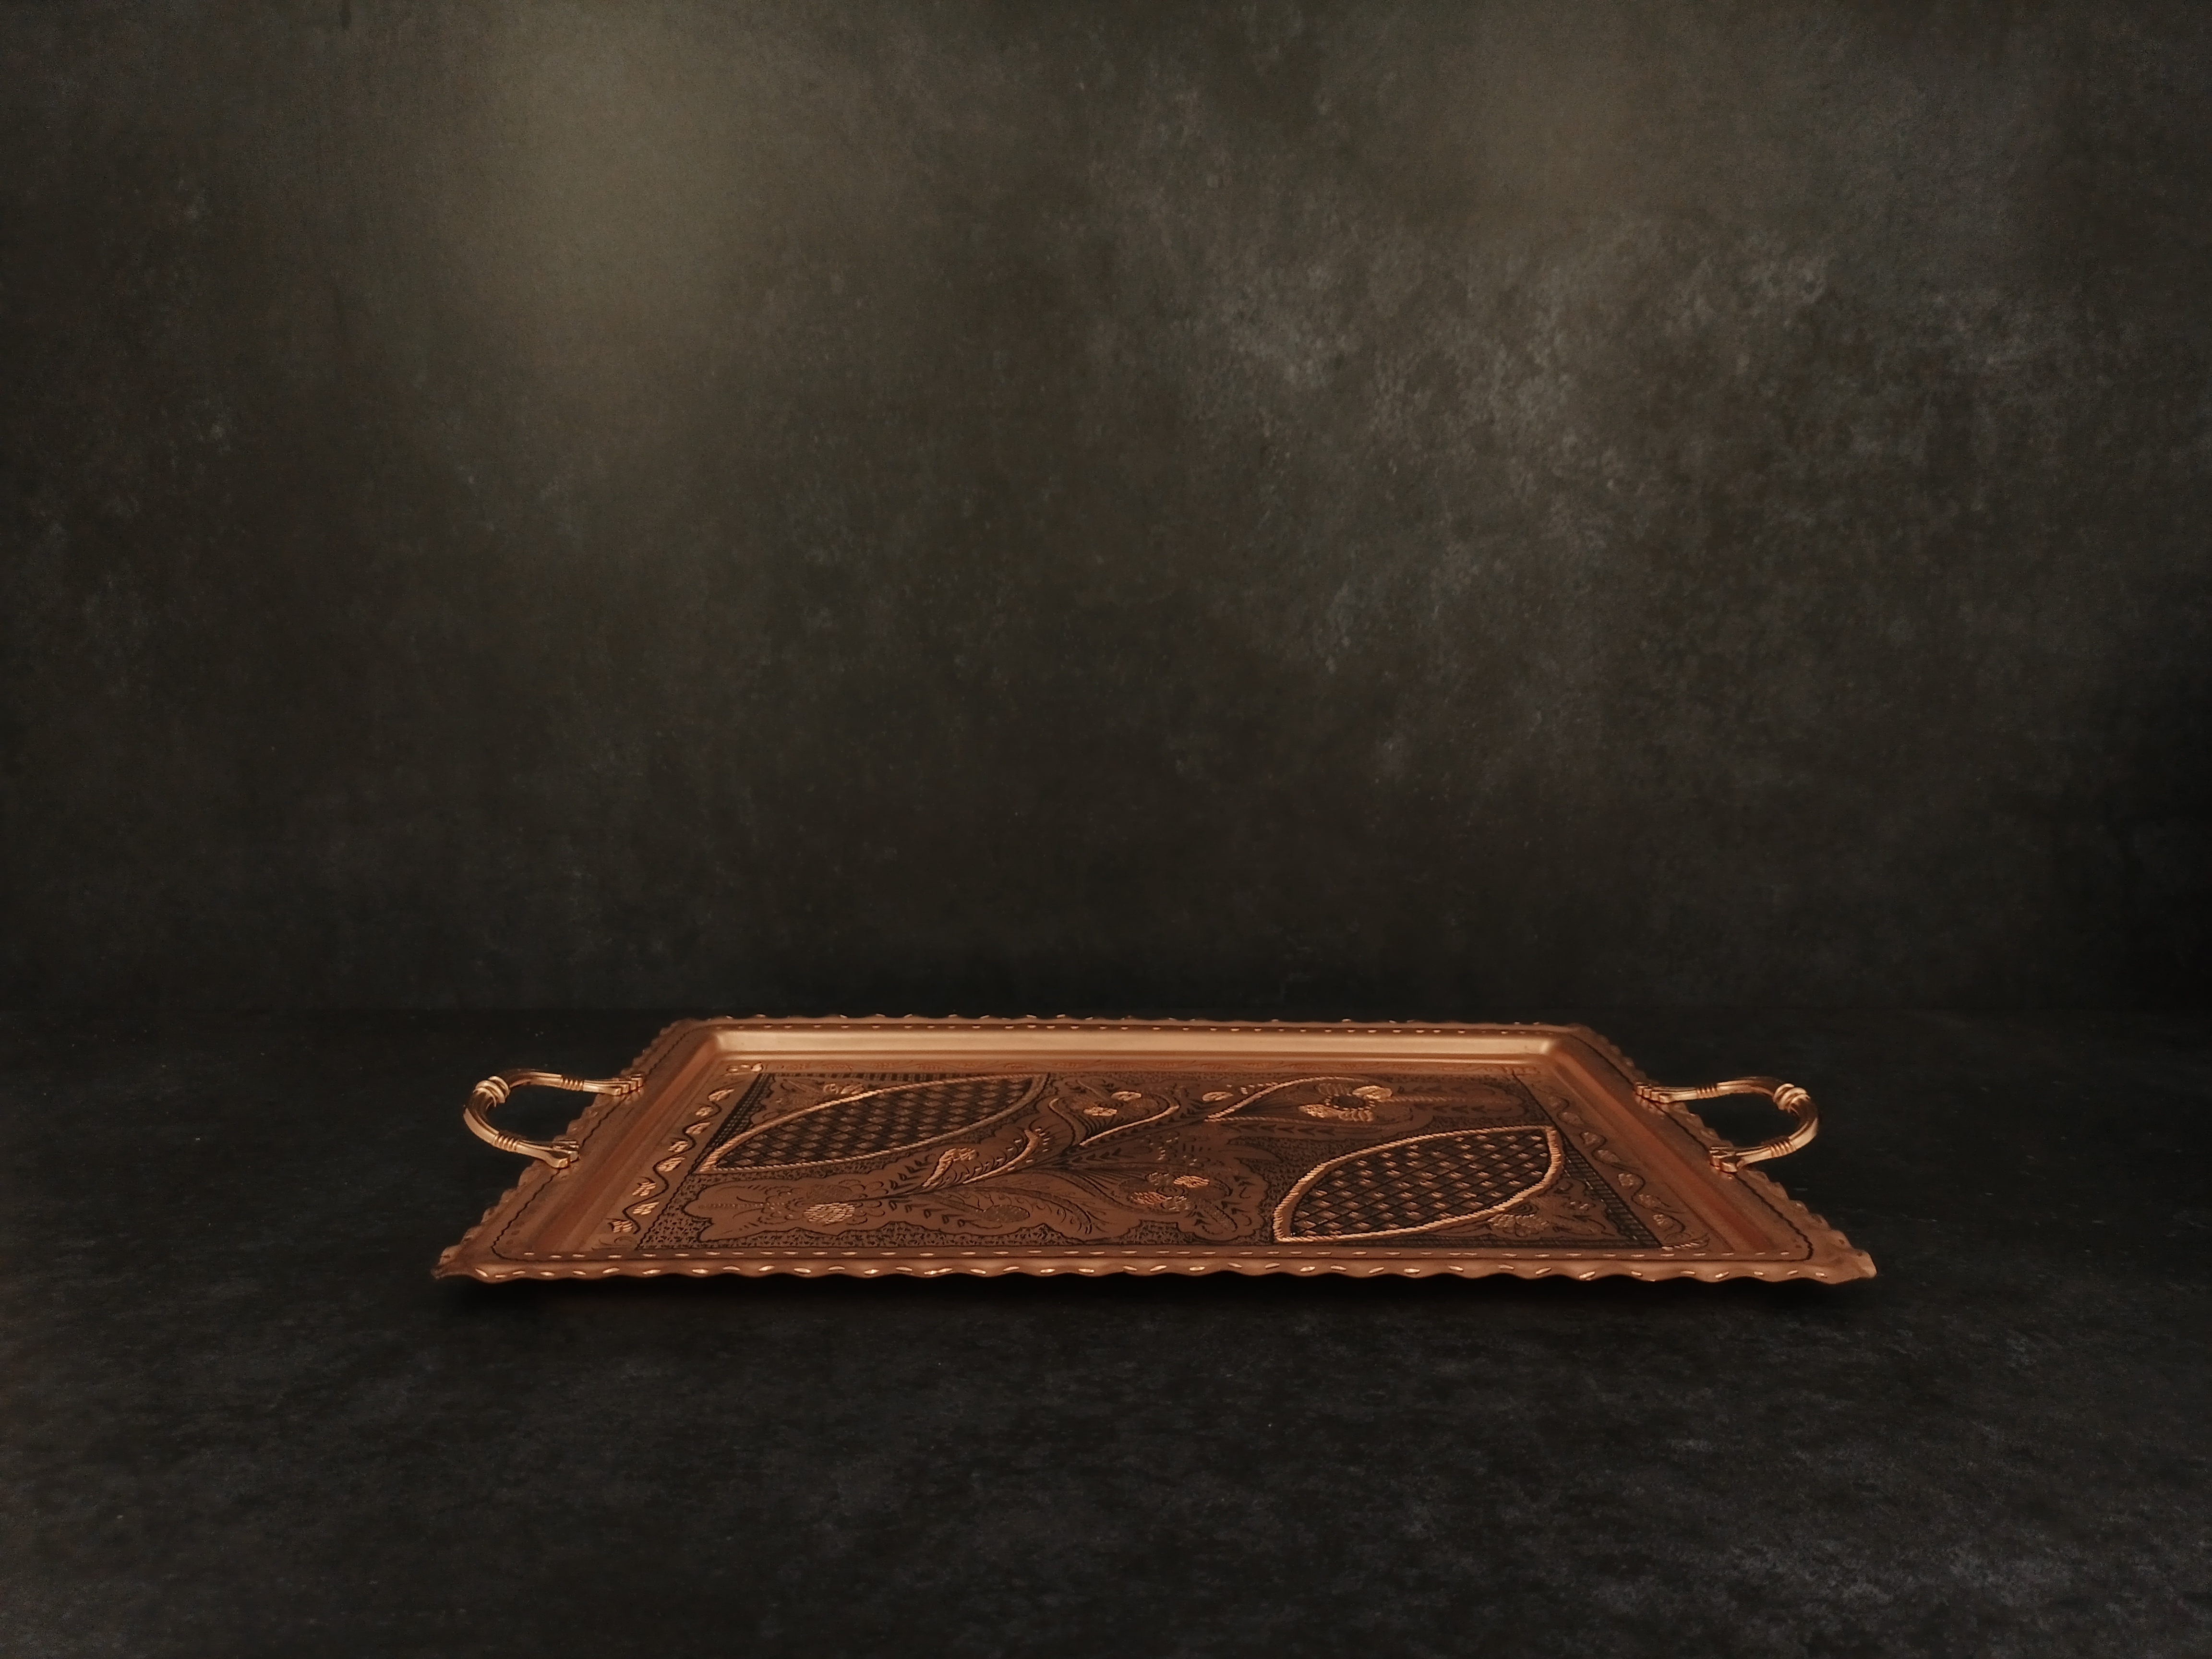 Turkish Handmade Copper Tray, Rectangular Serving Tray, Turkish Style Royal Decorated Coffee Table Tray